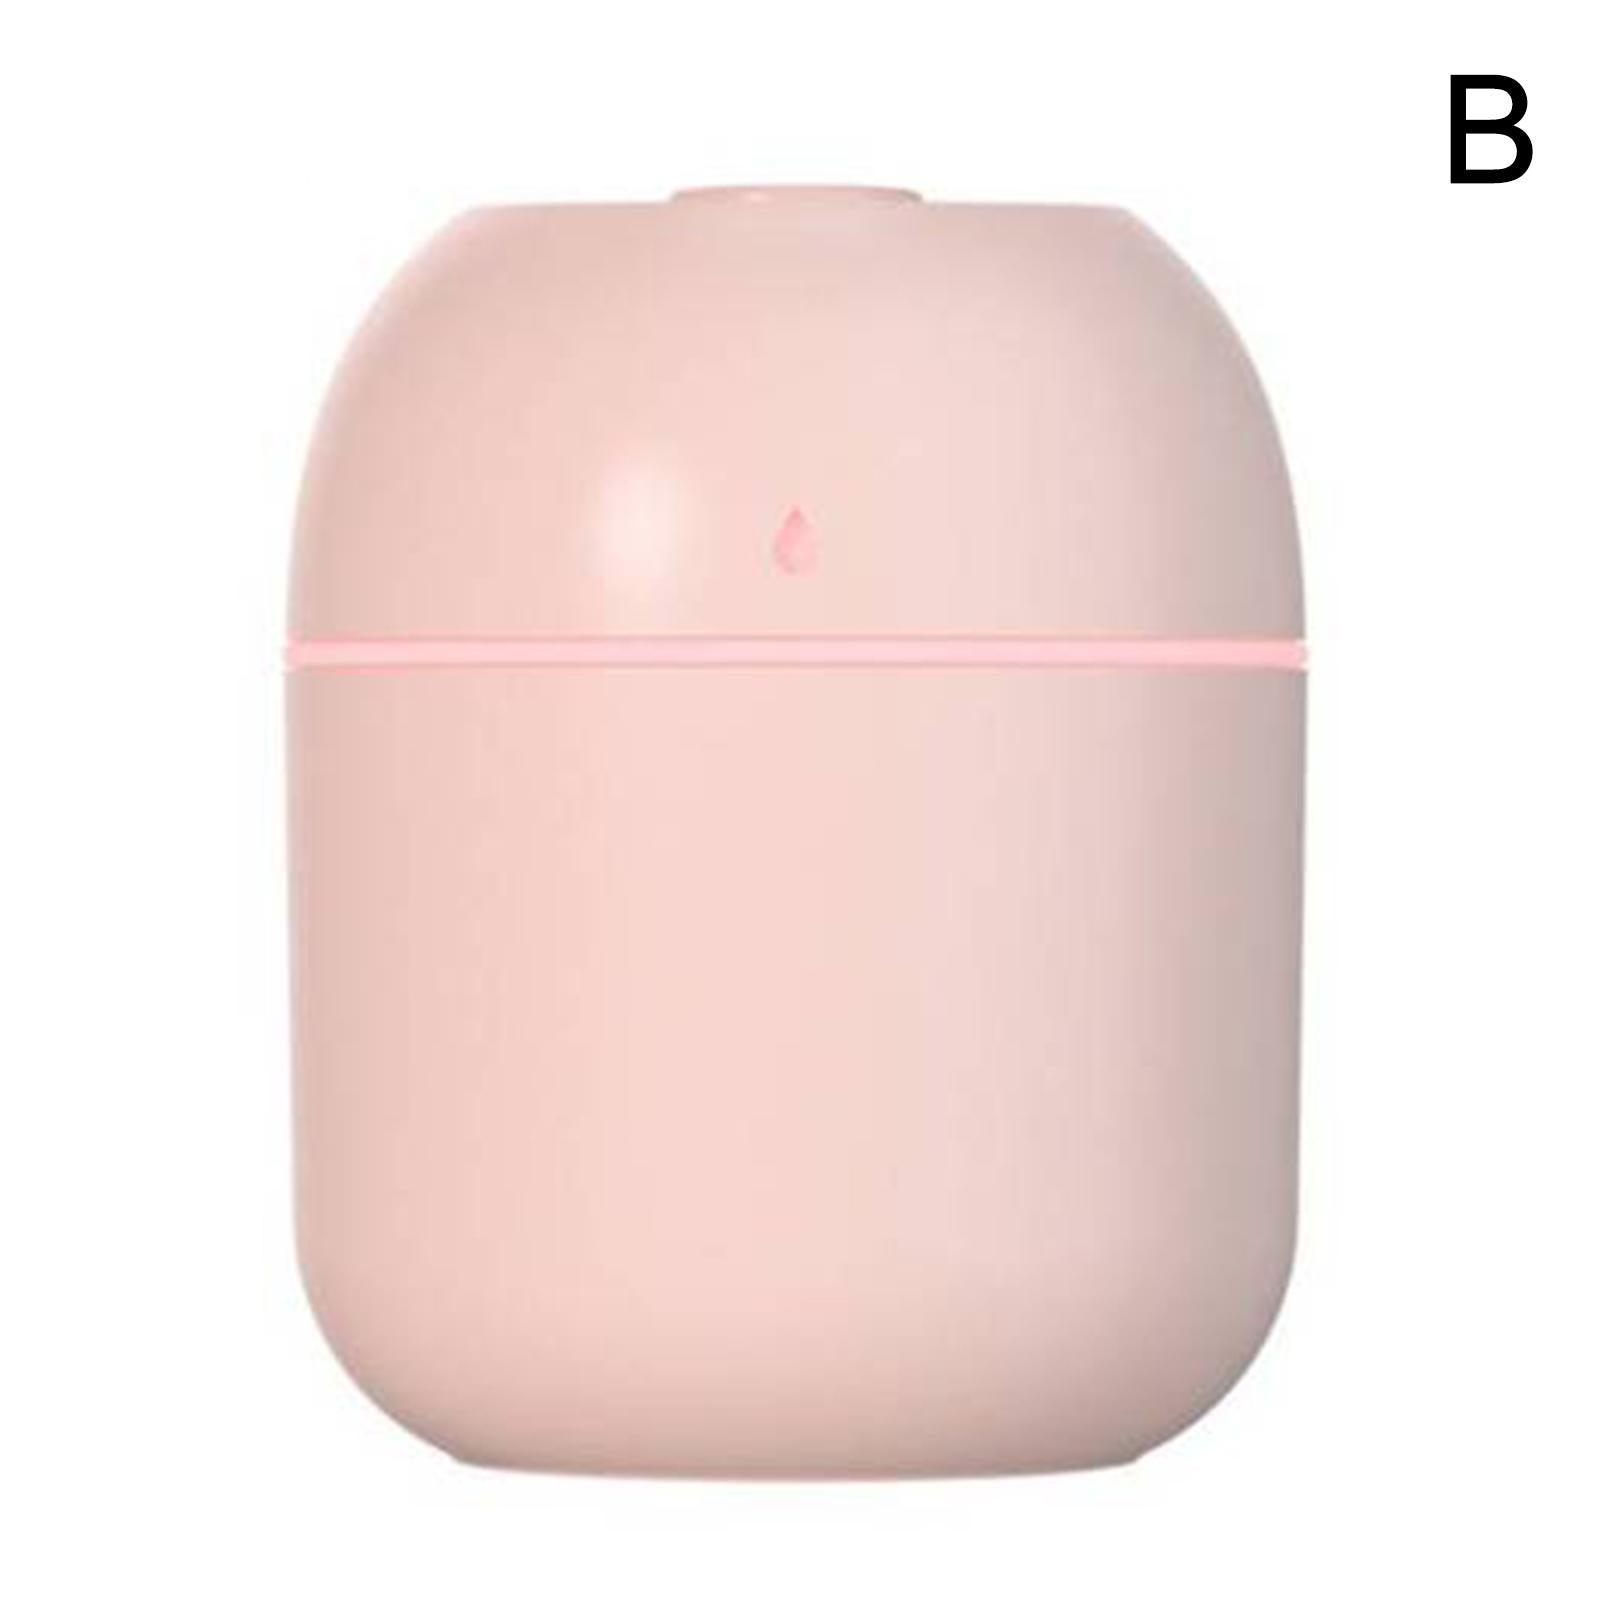 USB Aroma Diffuser Humidifier Sprayer Portable Home Appliance 220ml Electric Humidifier Desktop Home Fragrance Perfumes Perfume - Ammpoure Wellbeing